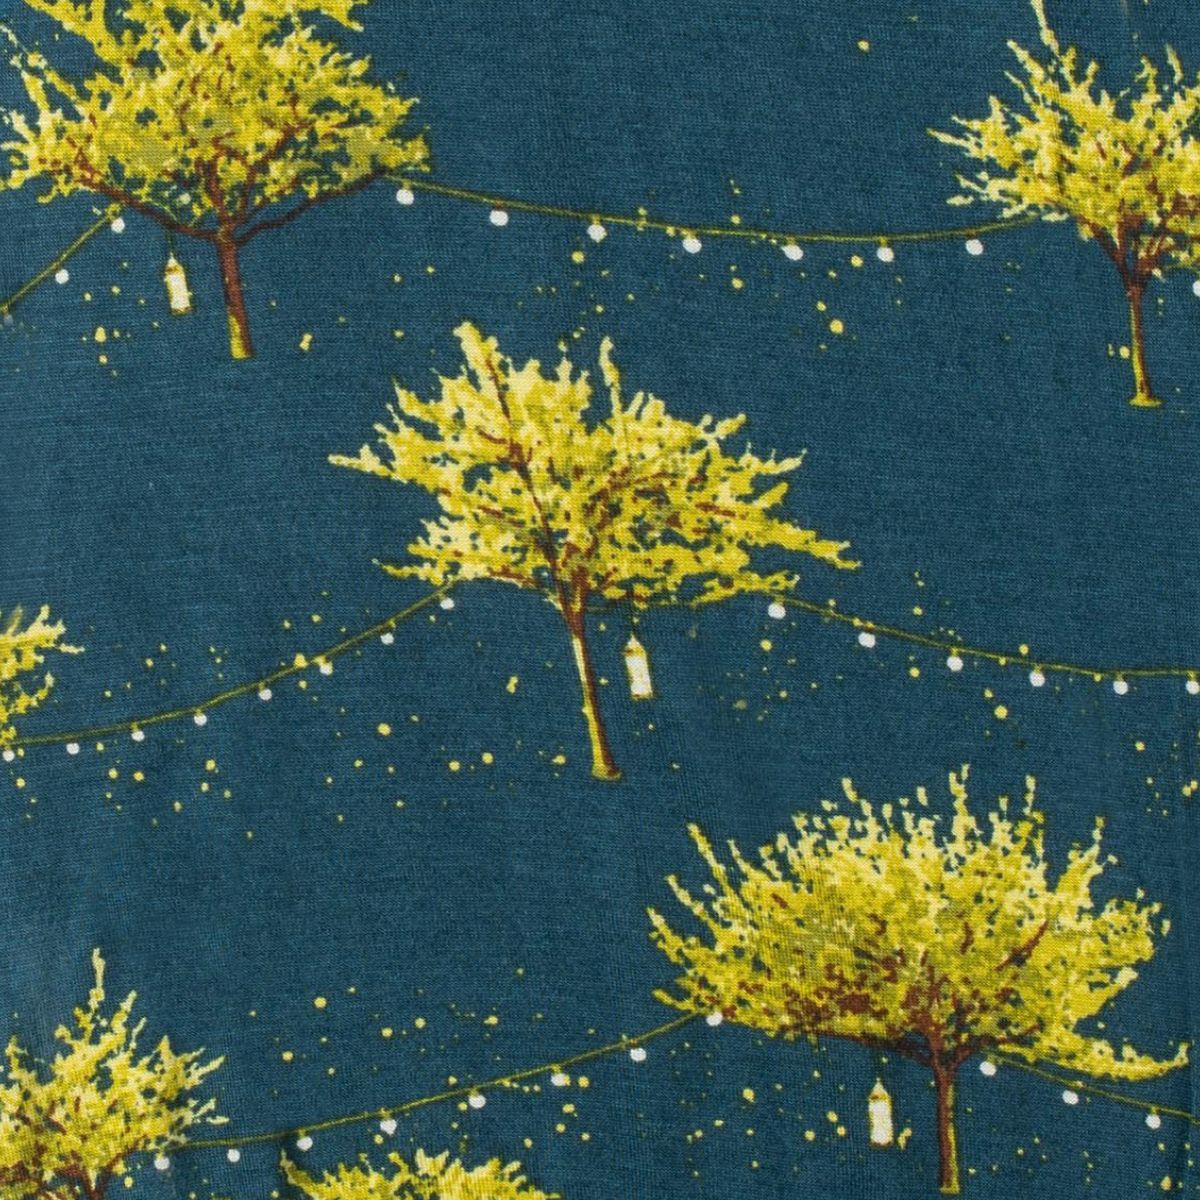 close-up of blue fabric with all-over pattern of trees and fireflies.